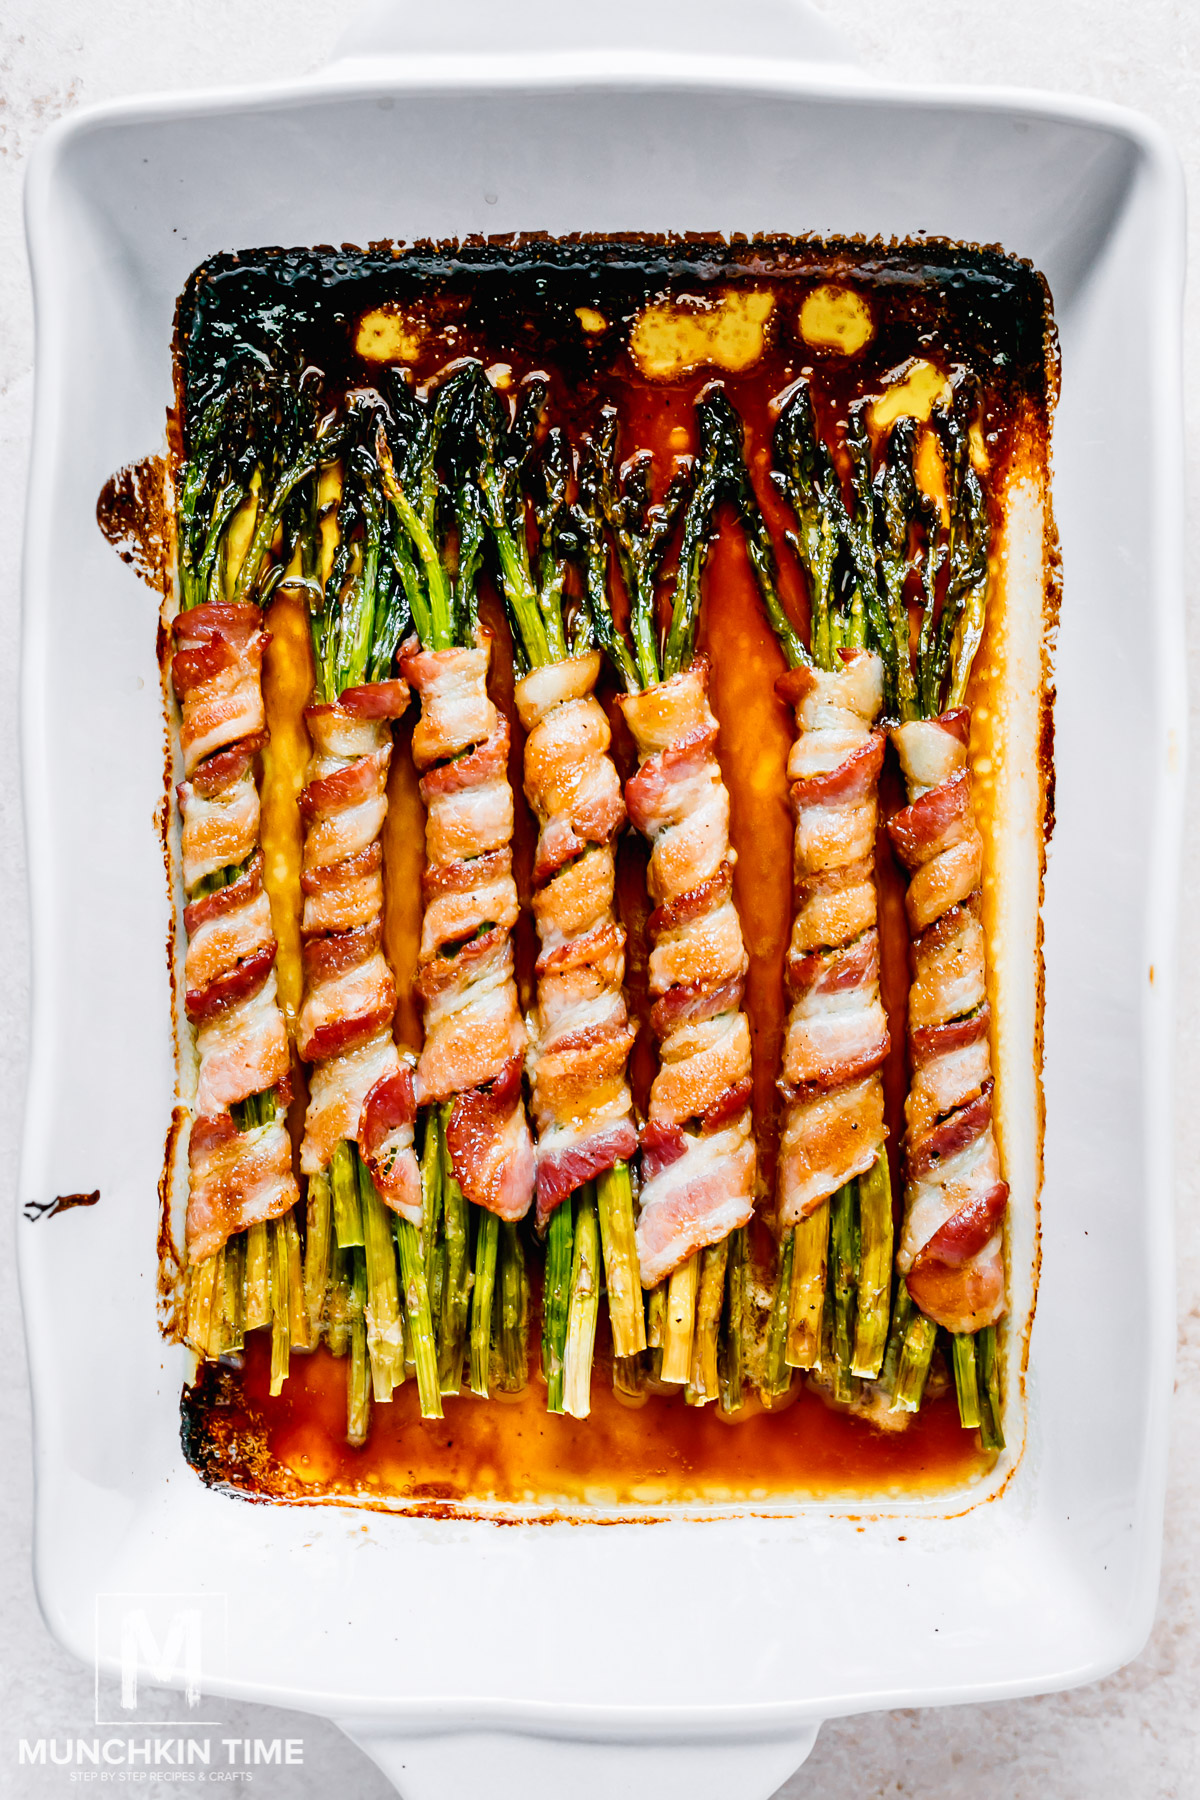 Oven baked asparagus bundles wrapped in bacon.